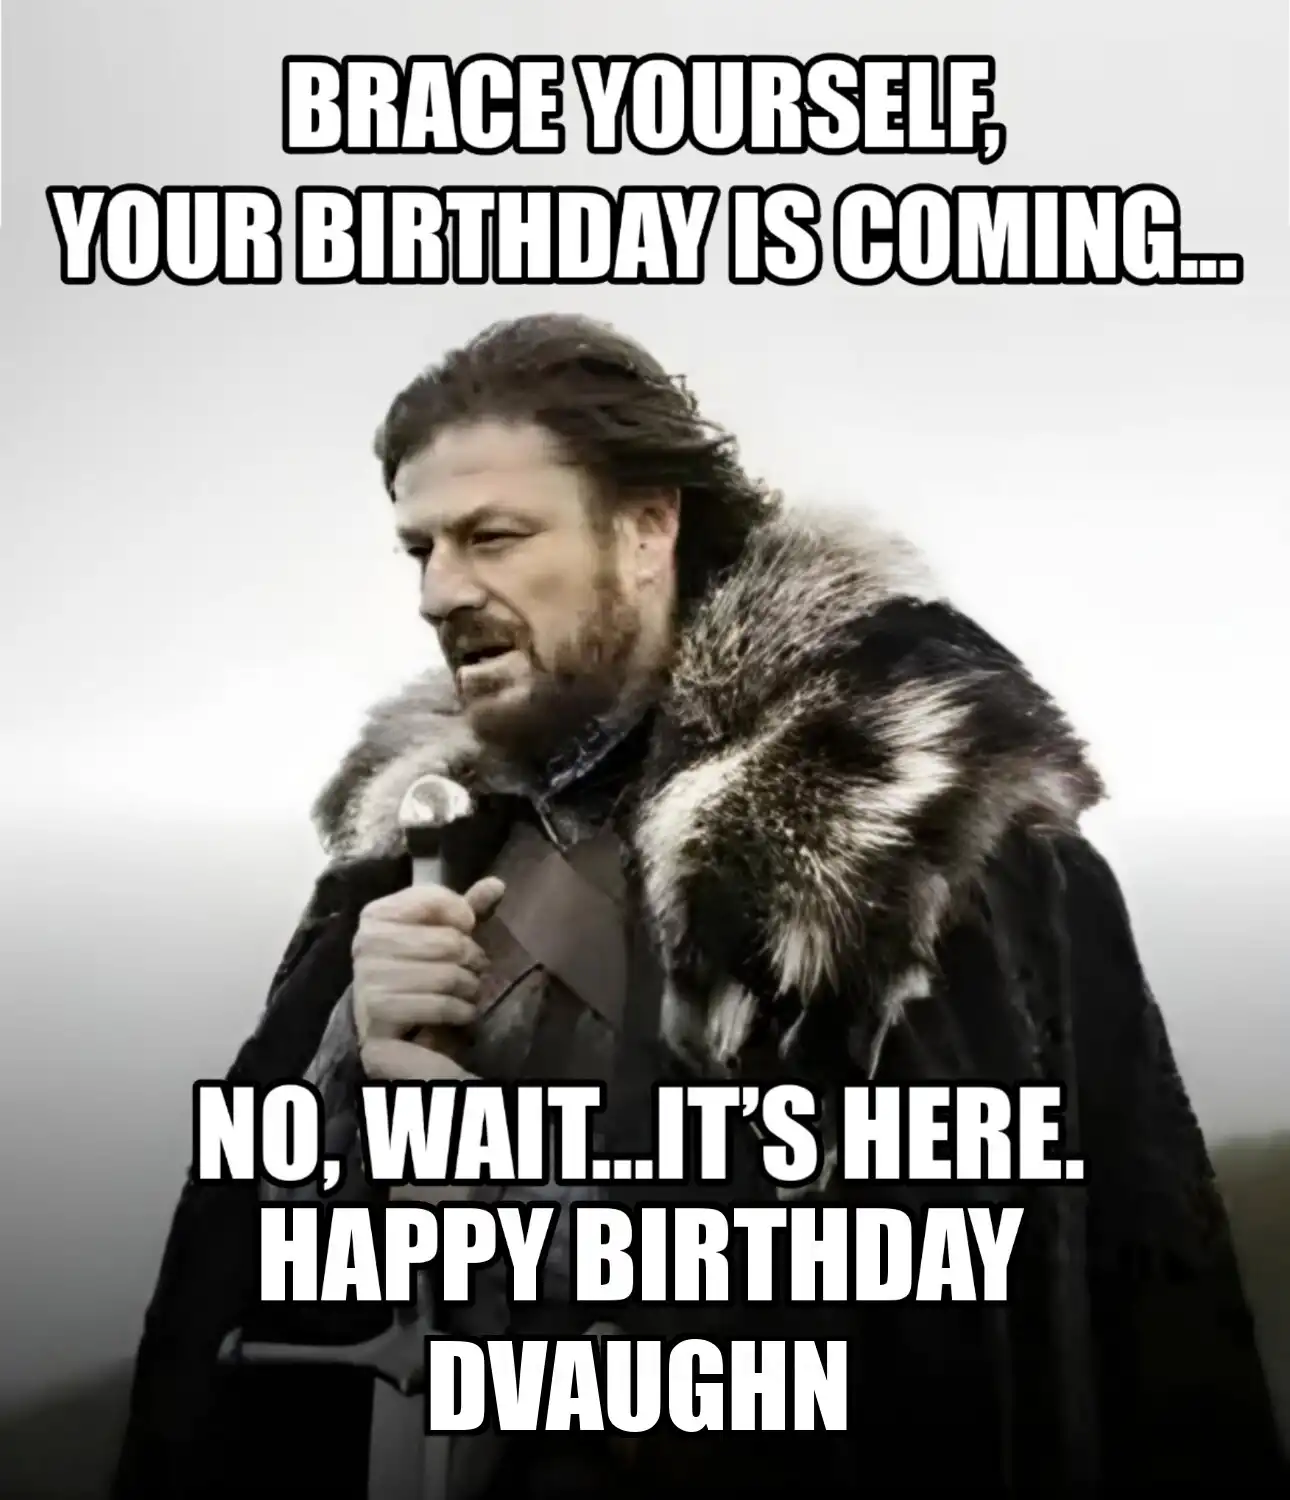 Happy Birthday Dvaughn Brace Yourself Your Birthday Is Coming Meme